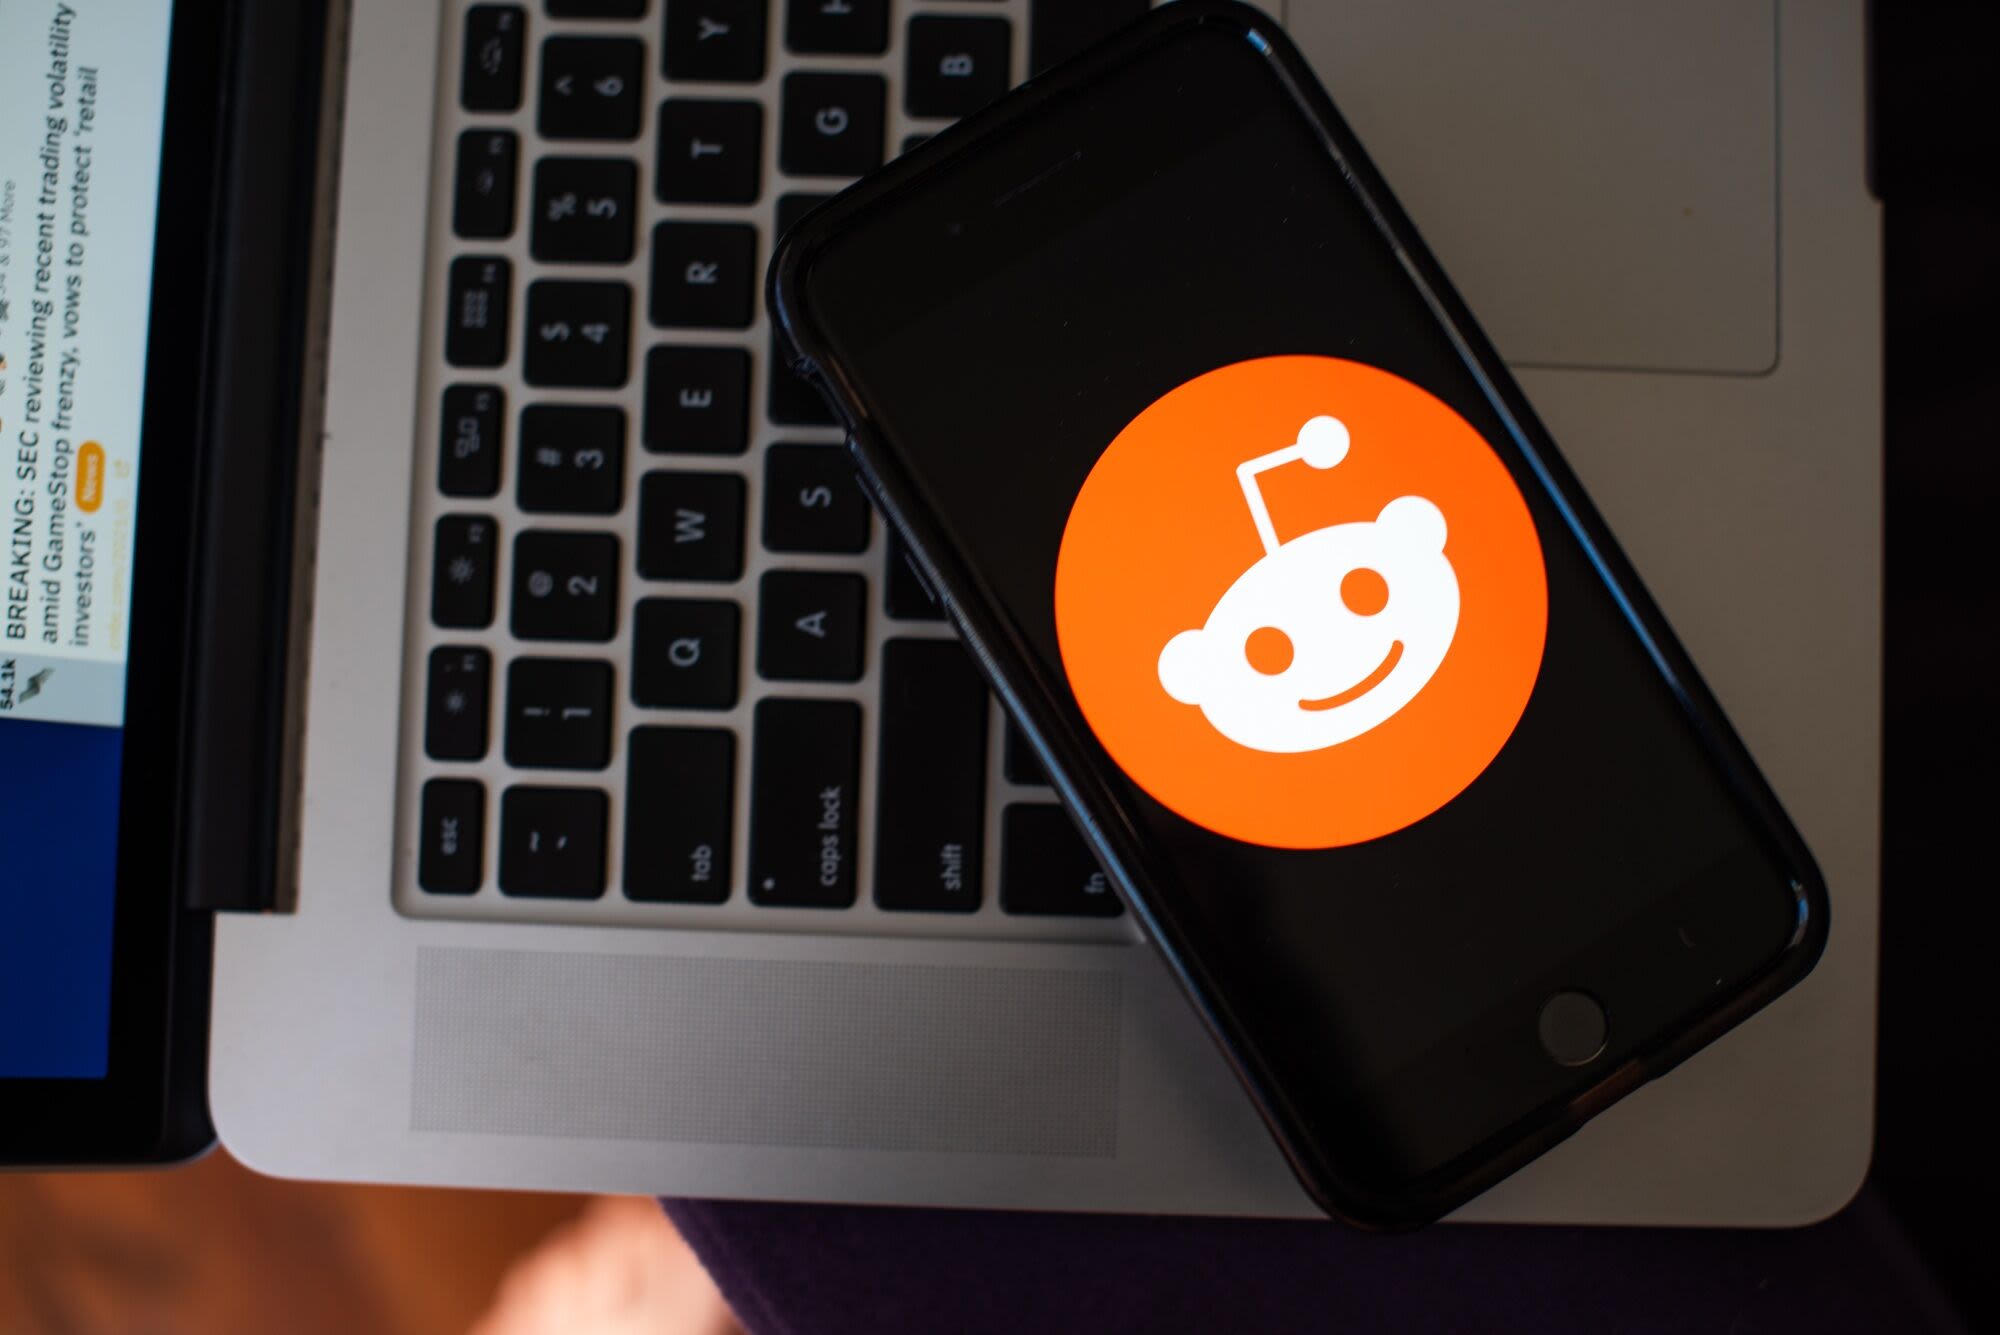 Reddit to Release New Products Aimed at Site’s ‘User Economy’